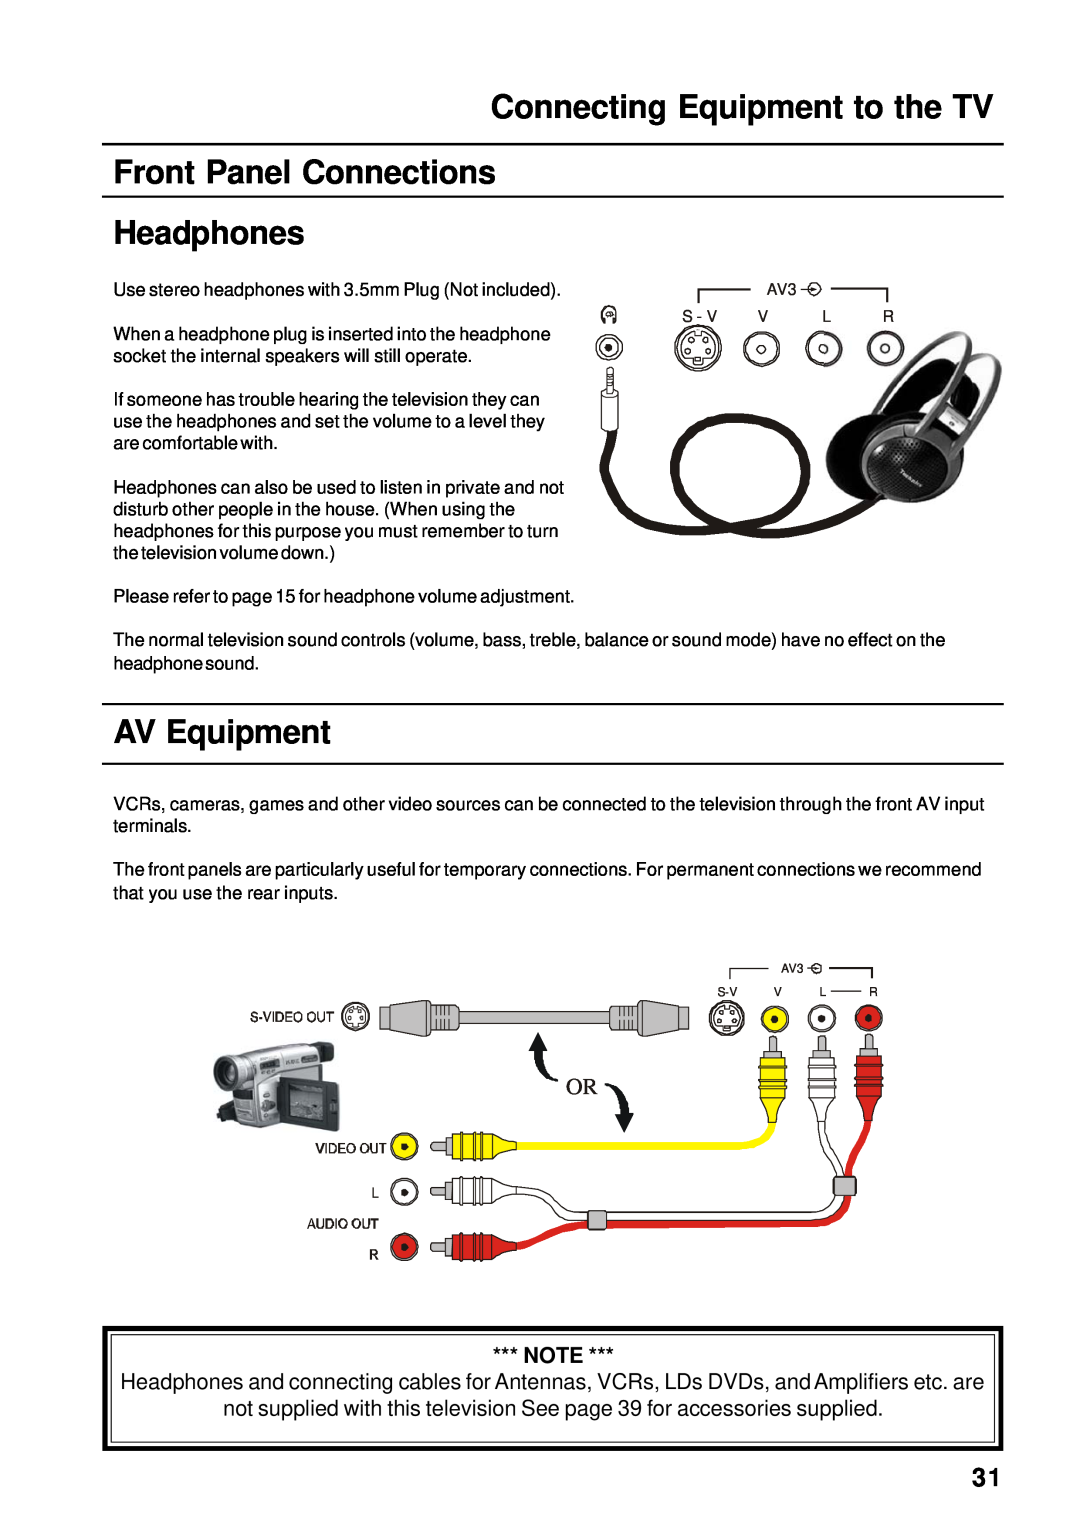 Panasonic TX-66PW60A, TX-86PW155A Connecting Equipment to the TV Front Panel Connections Headphones, AV Equipment 